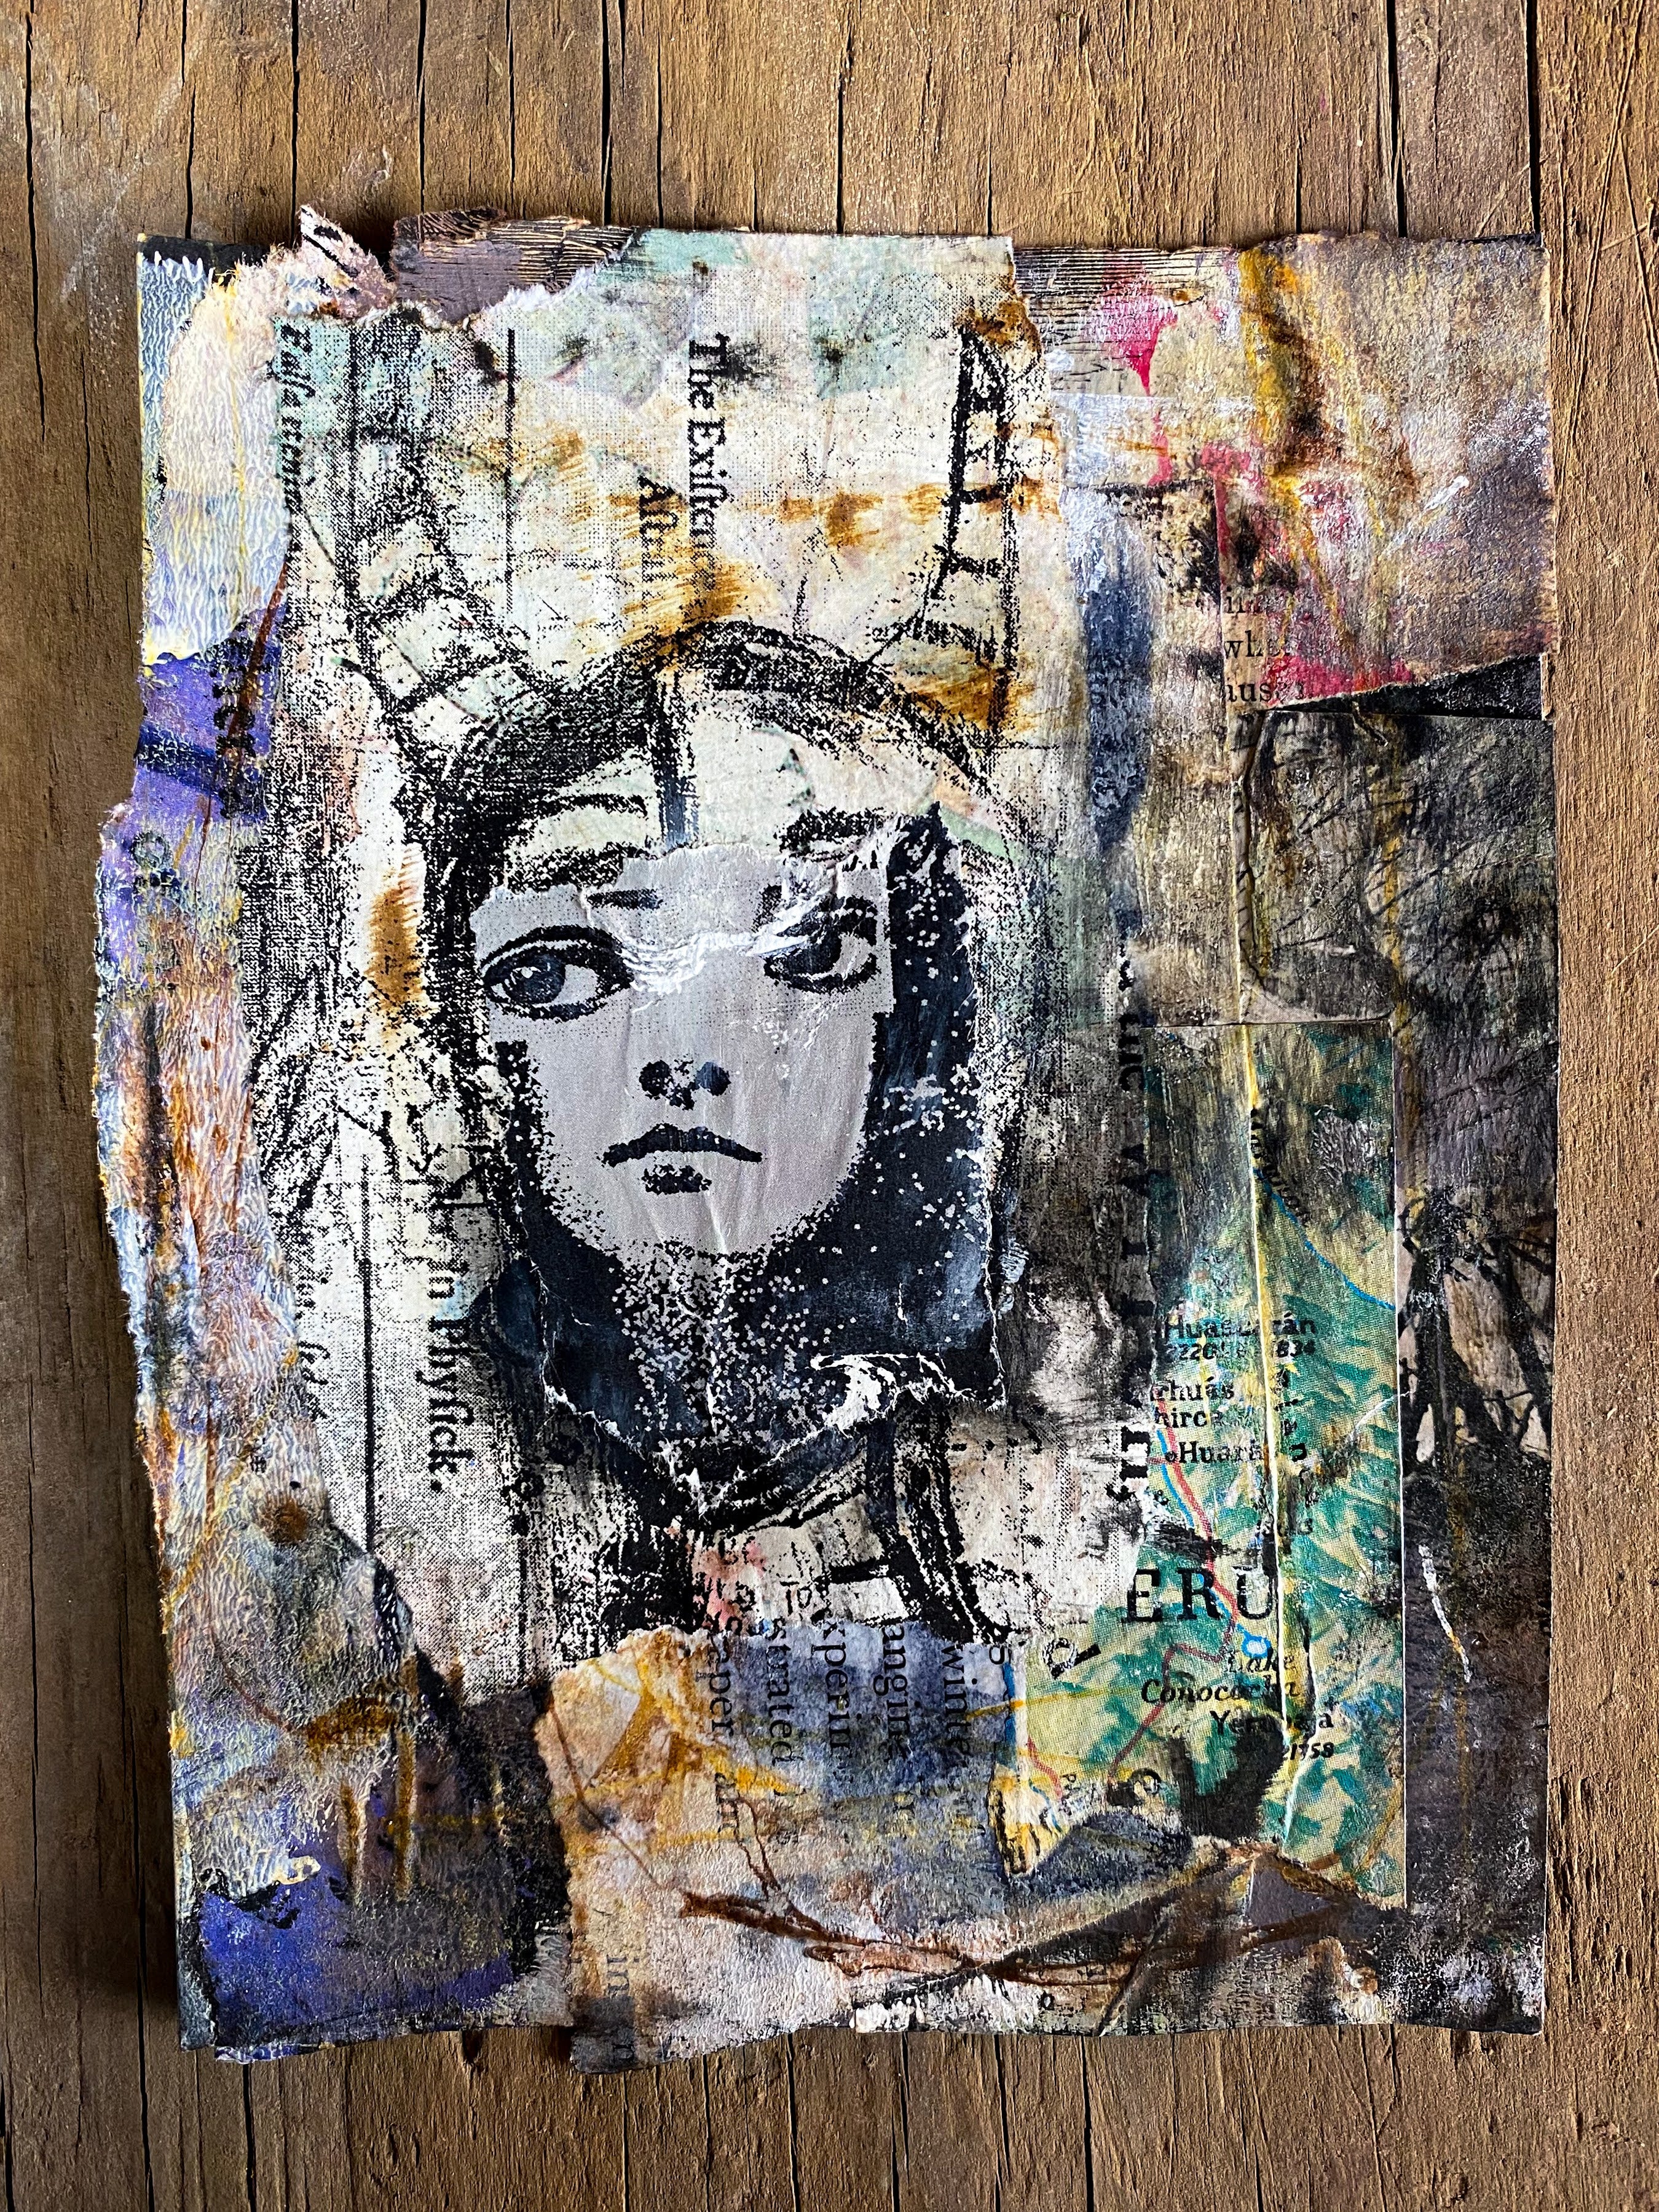 She Never Fit In - Original Mixed Media Collage